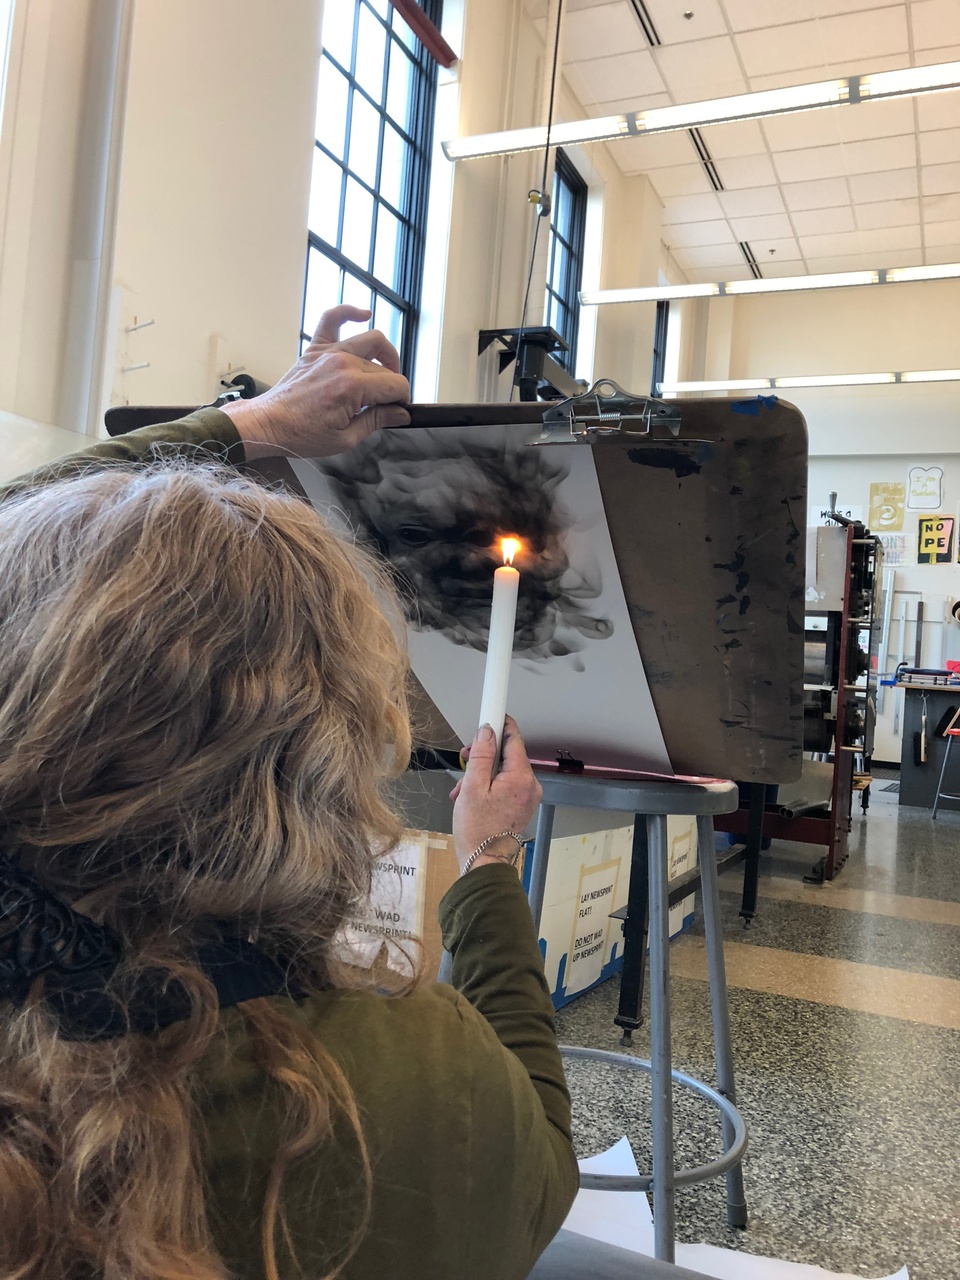 Artist drawing with smoke from a candle.